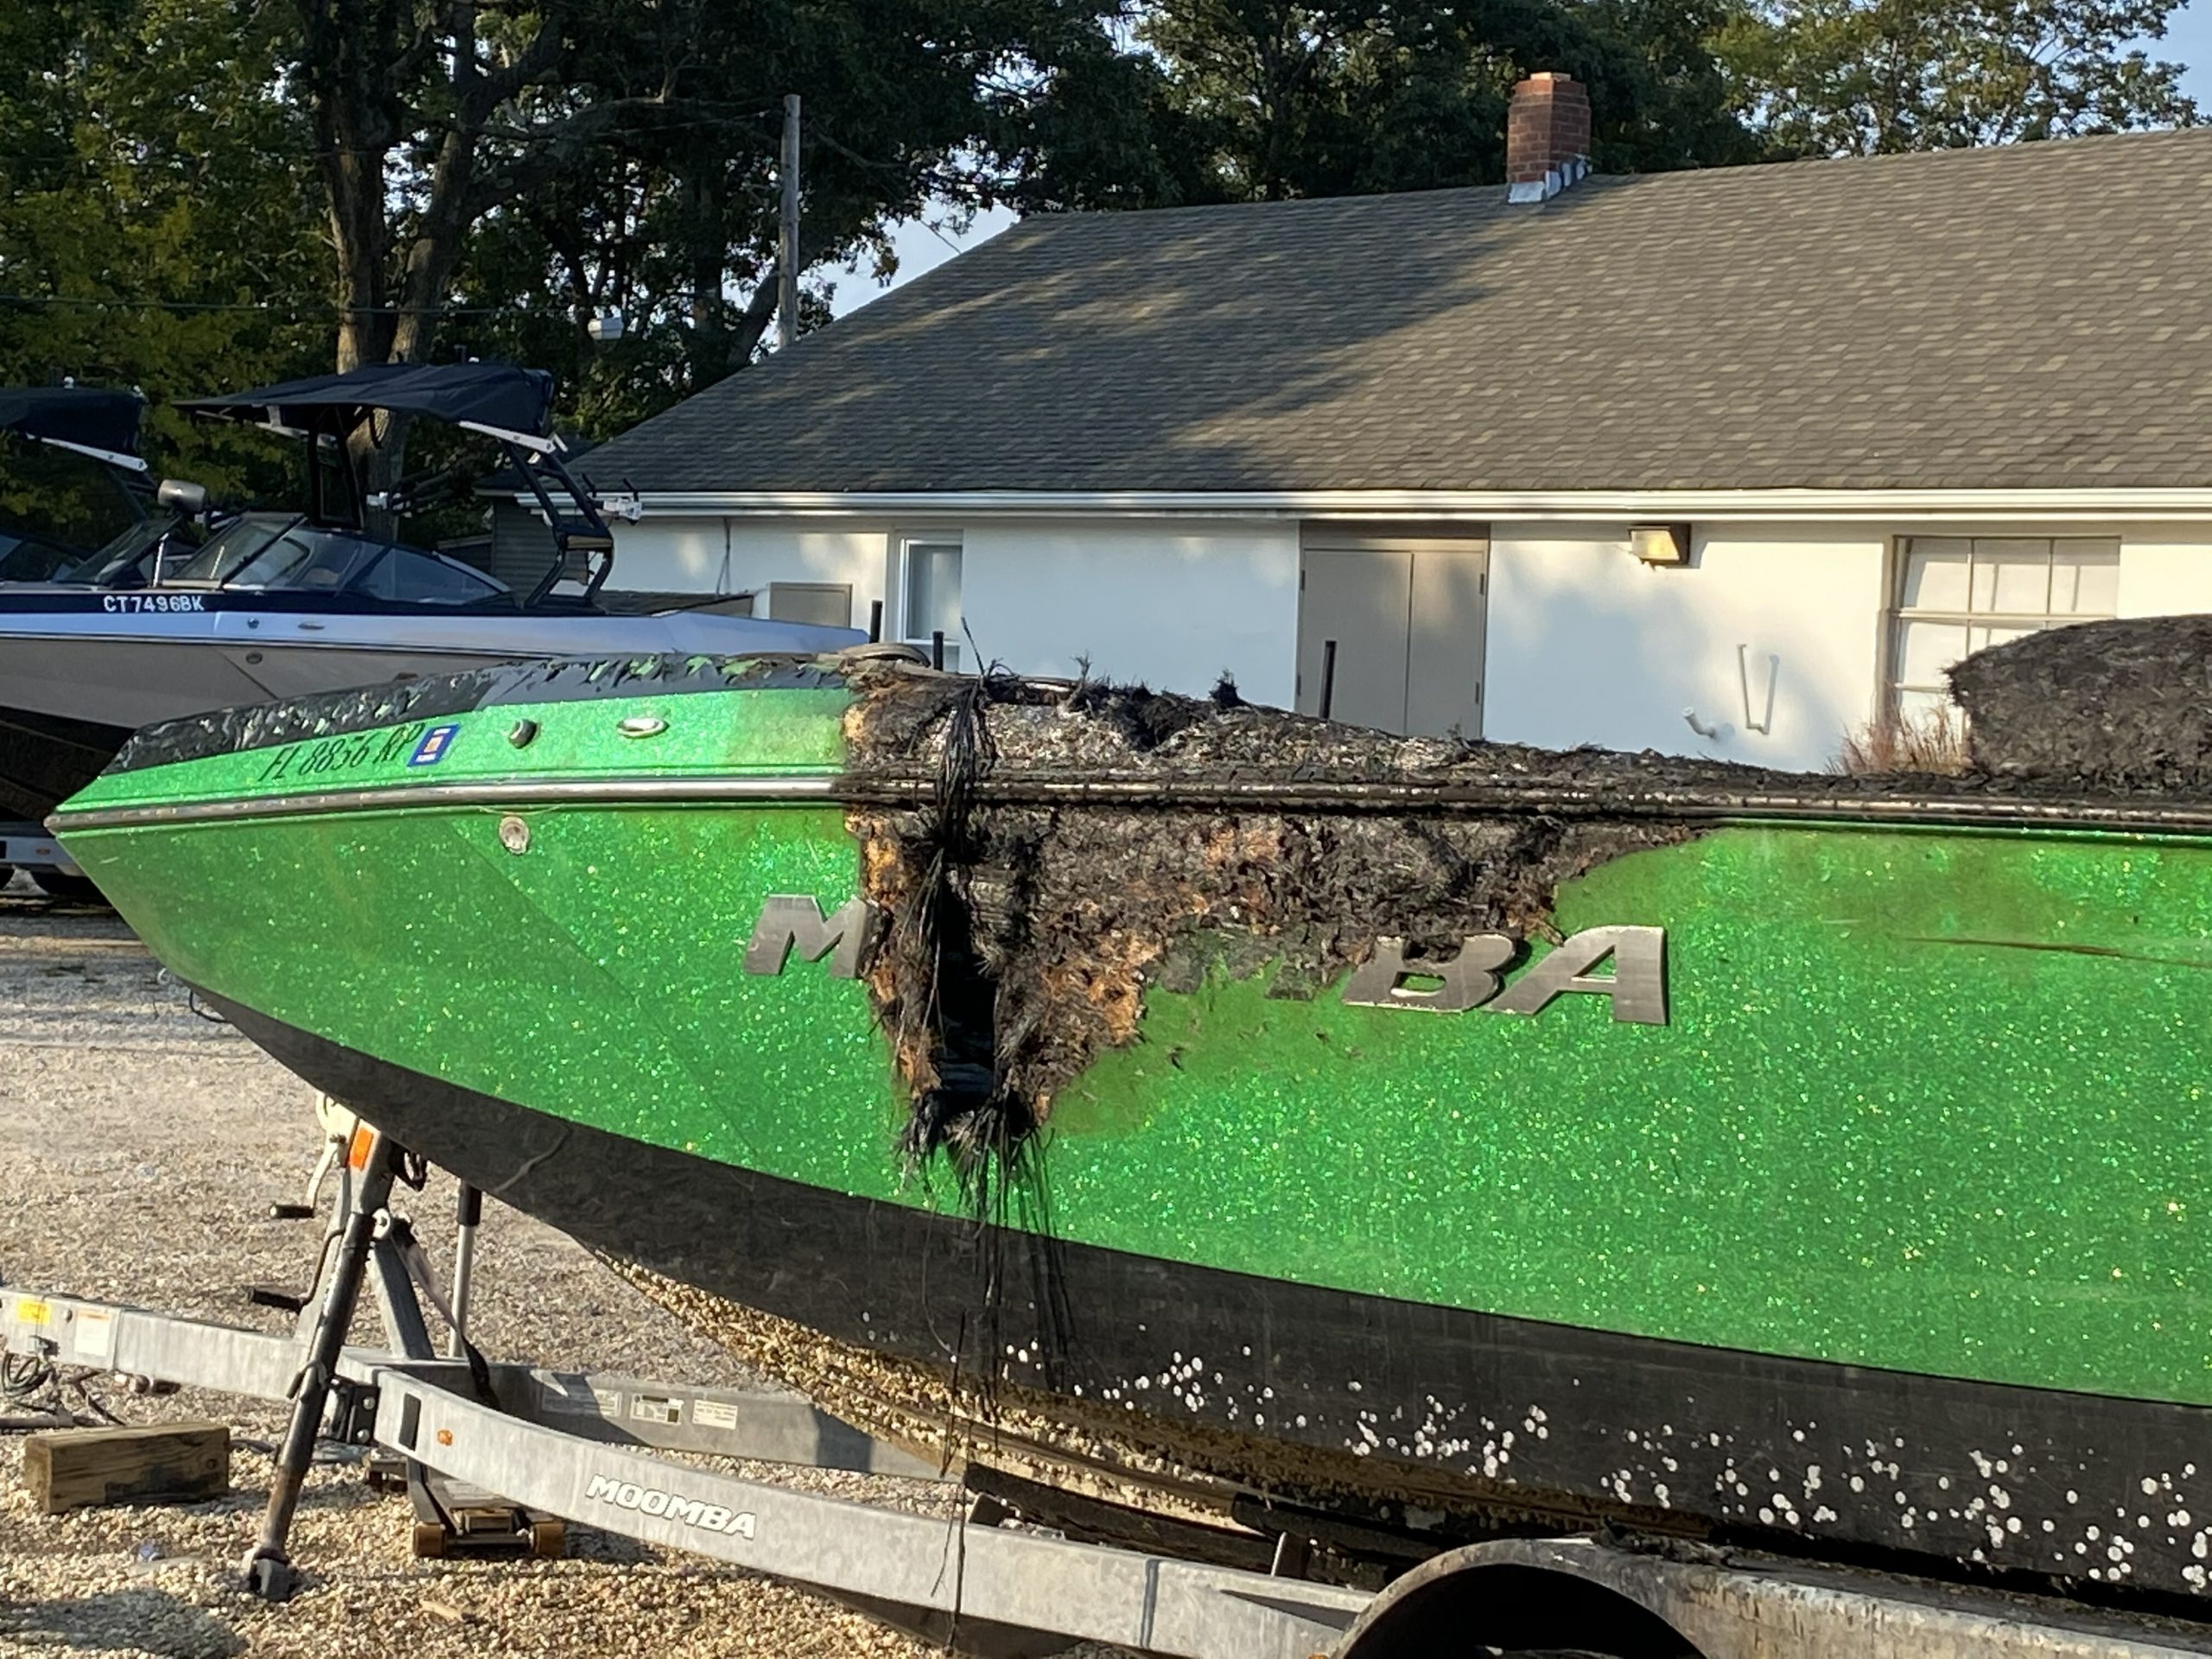 One of the boats that sustained heavy damage in a fire at Hidden Cove Marina in Noyac Friday night. ELLEN DIOGUARDI